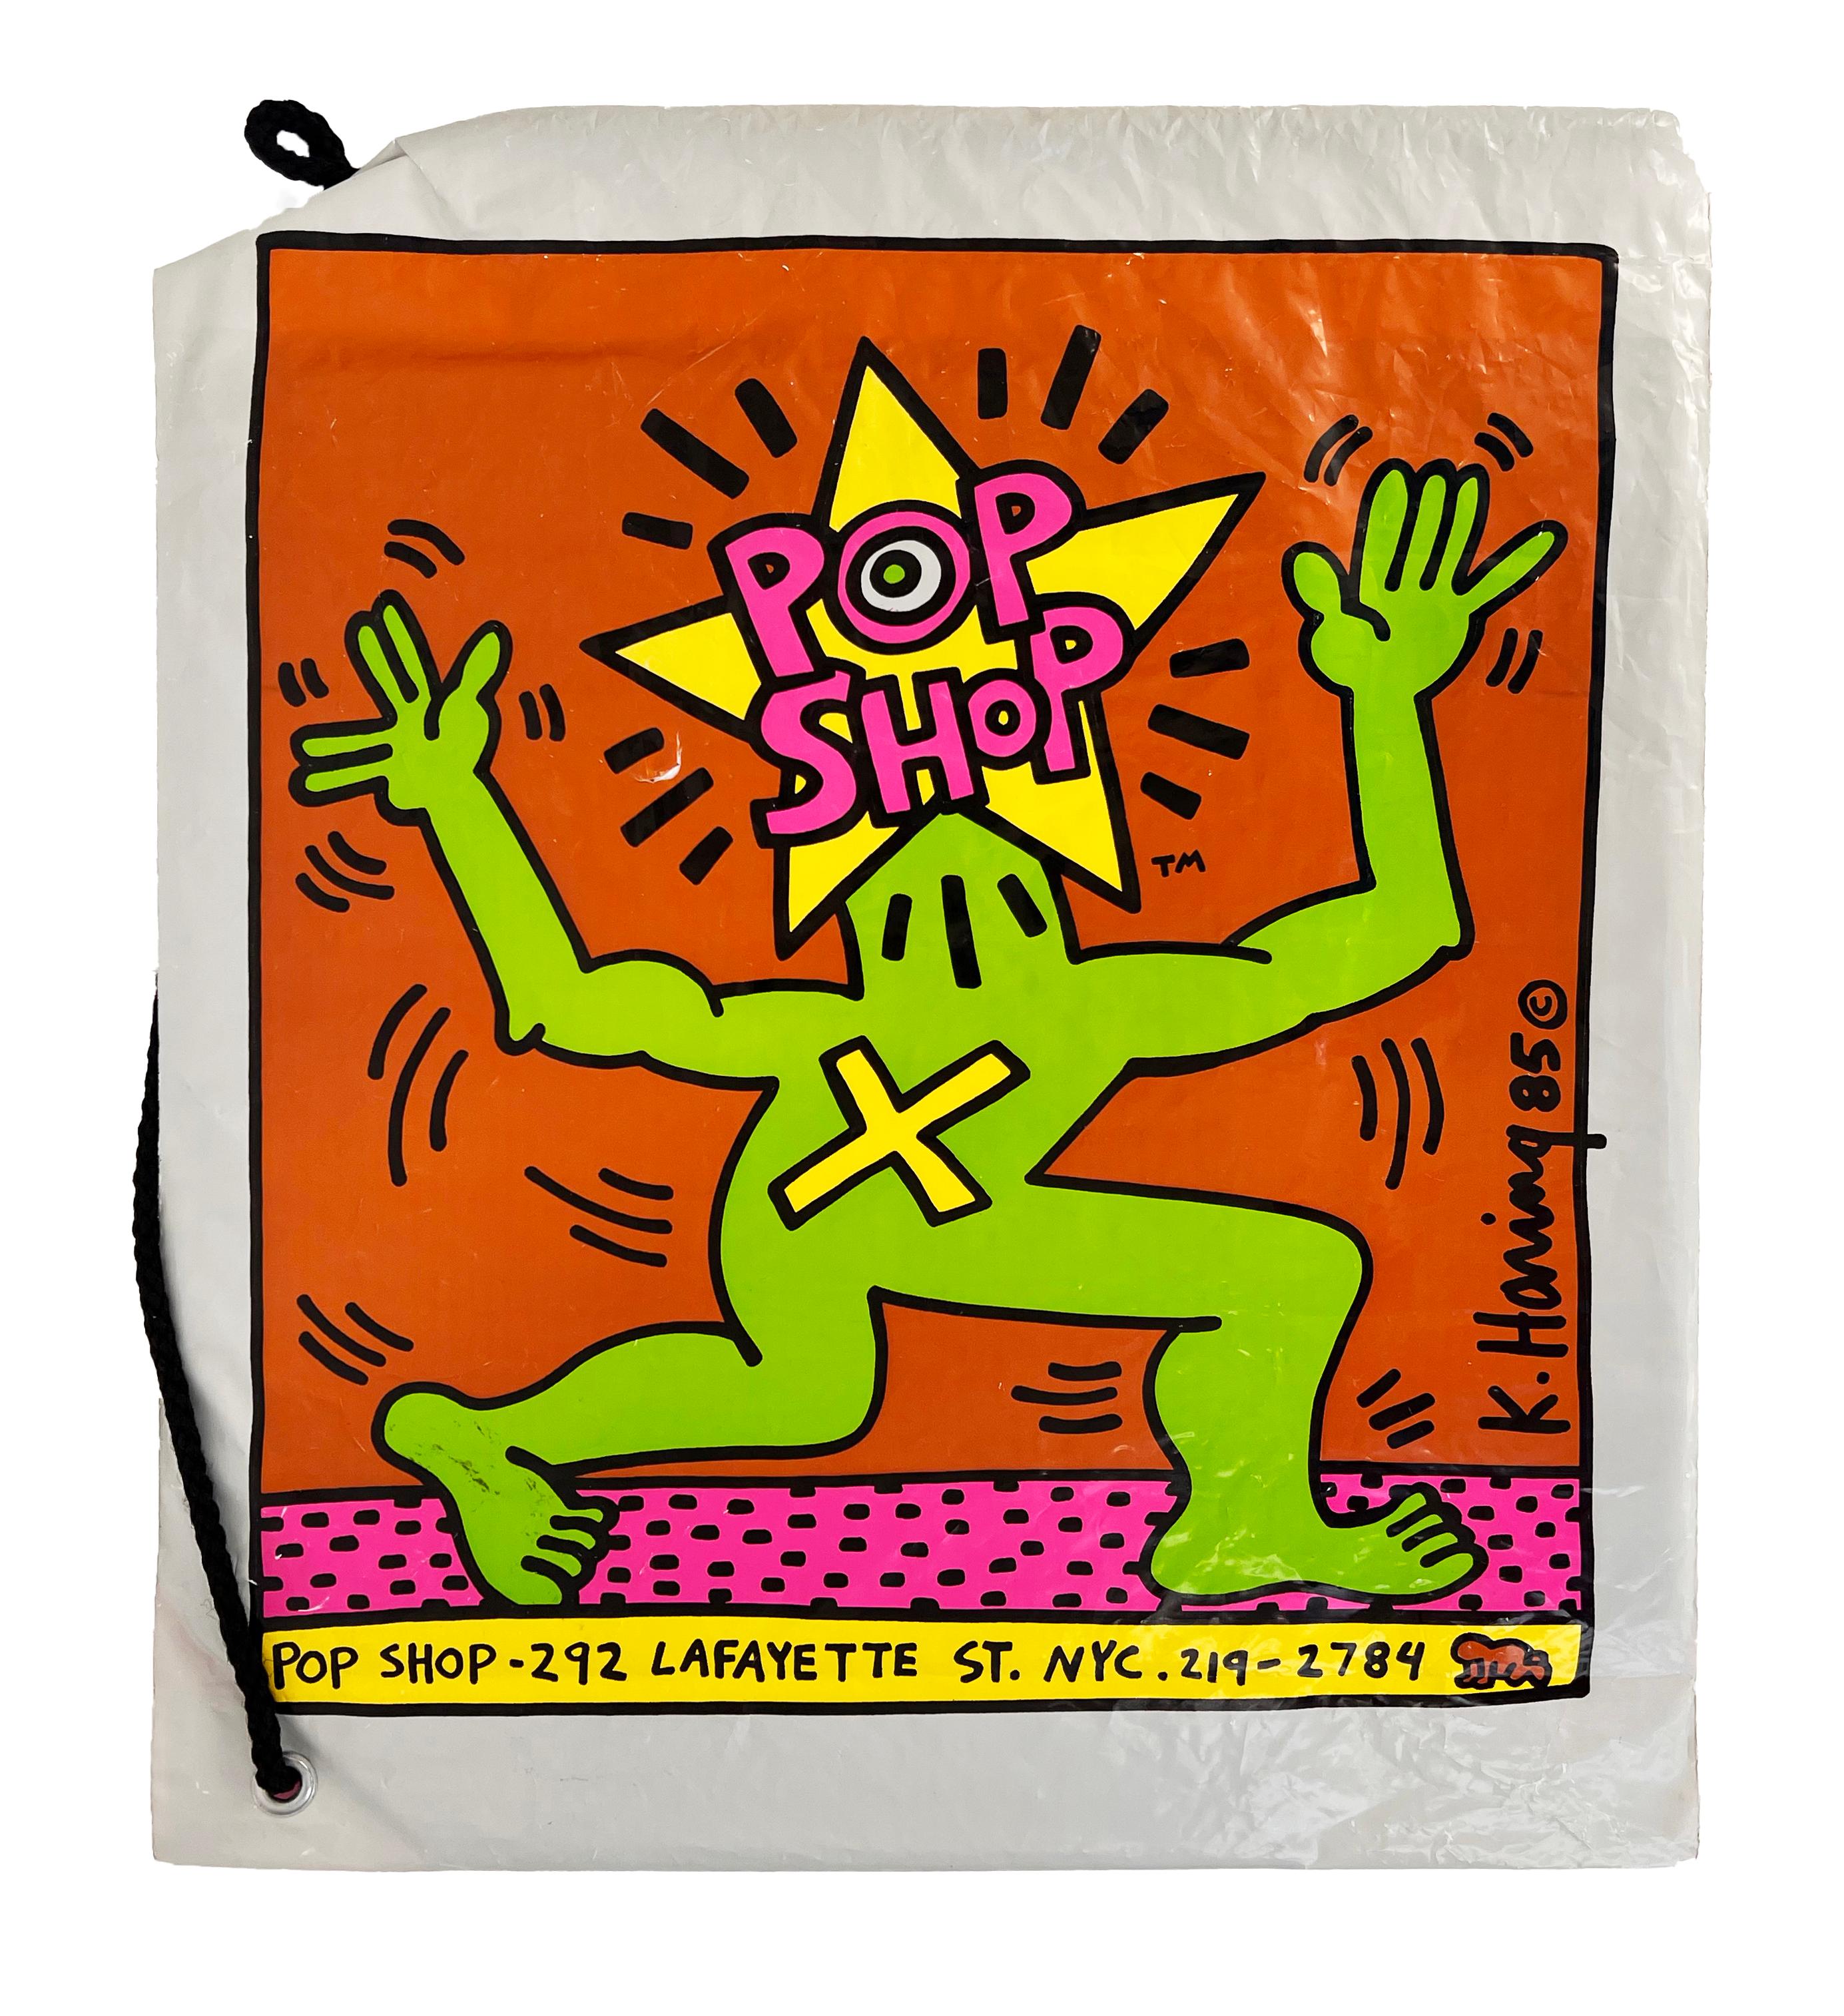 Keith Haring Pop Shop Bags set of 2, 1986:
Vintage original 1980s Keith Haring Pop Shop bag set designed & illustrated by the artist. Both feature a bold Keith Haring printed signature and standout original Haring Pop shop logos, plus bright, lush